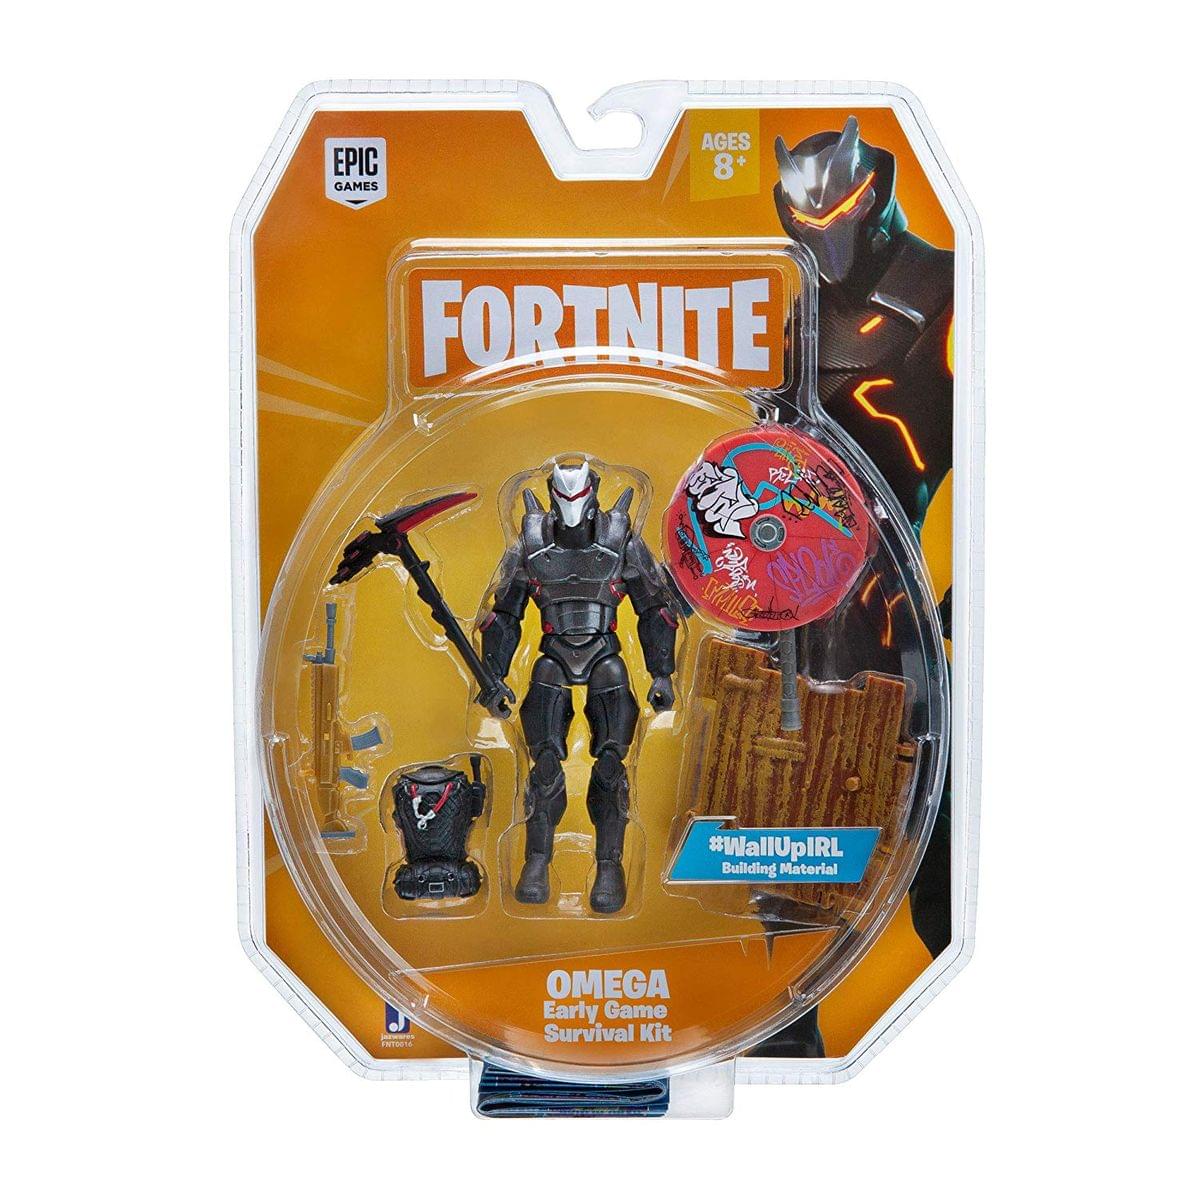 Fortnite 4-Inch Action Figure Early Game Survival Kit - Omega